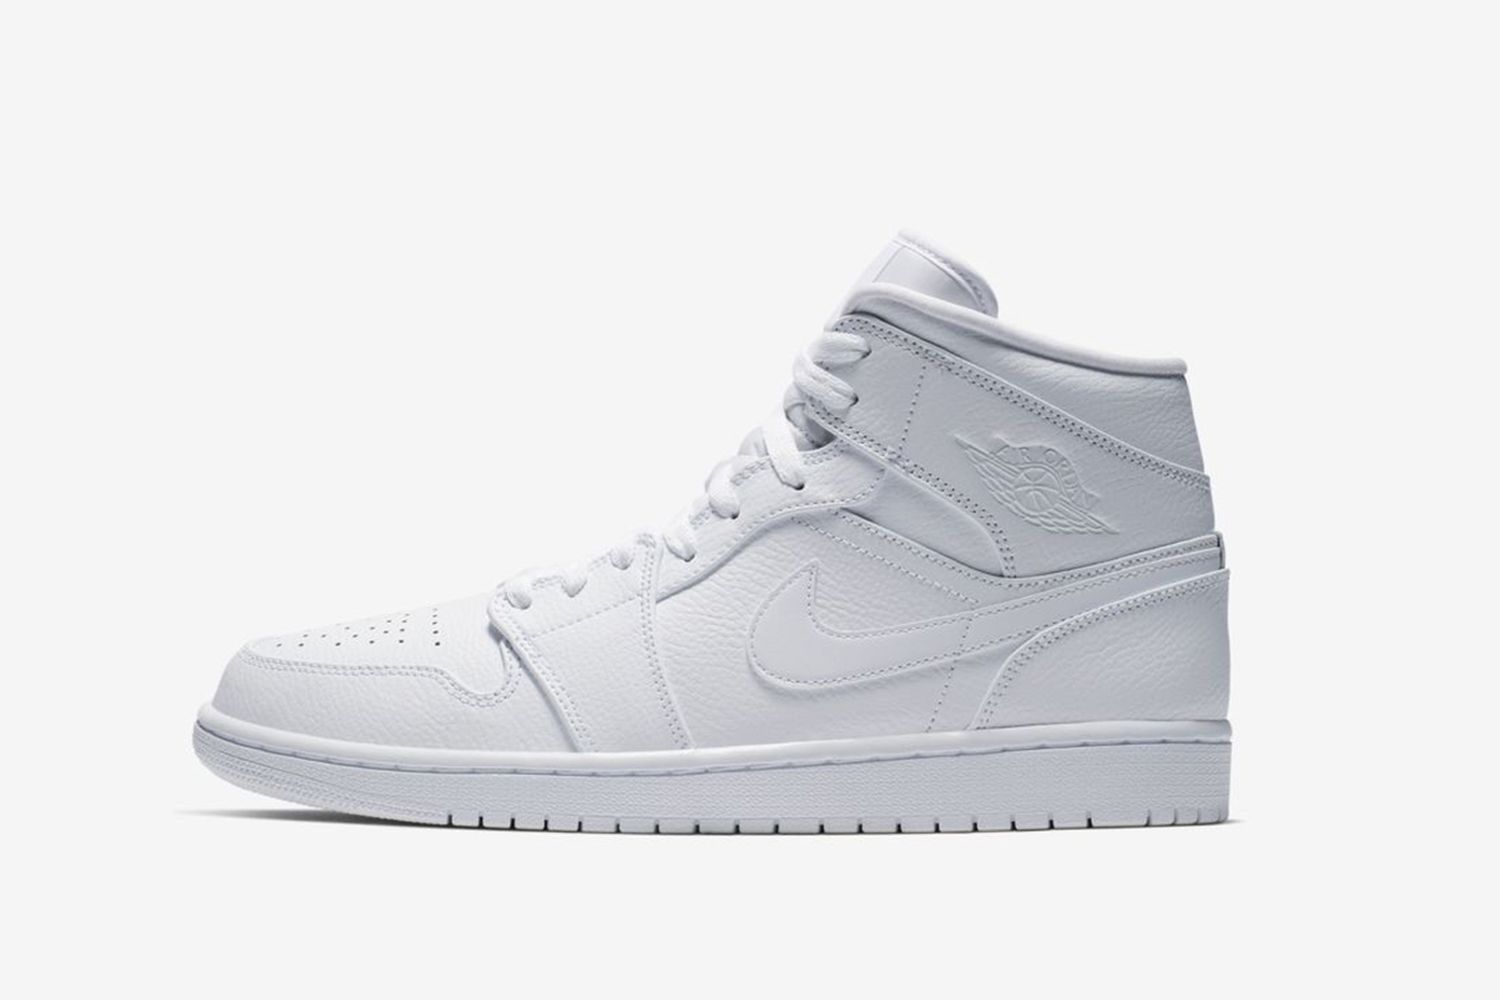 Escarpado objetivo materno 10 of the Best White Nikes to Rock This Summer